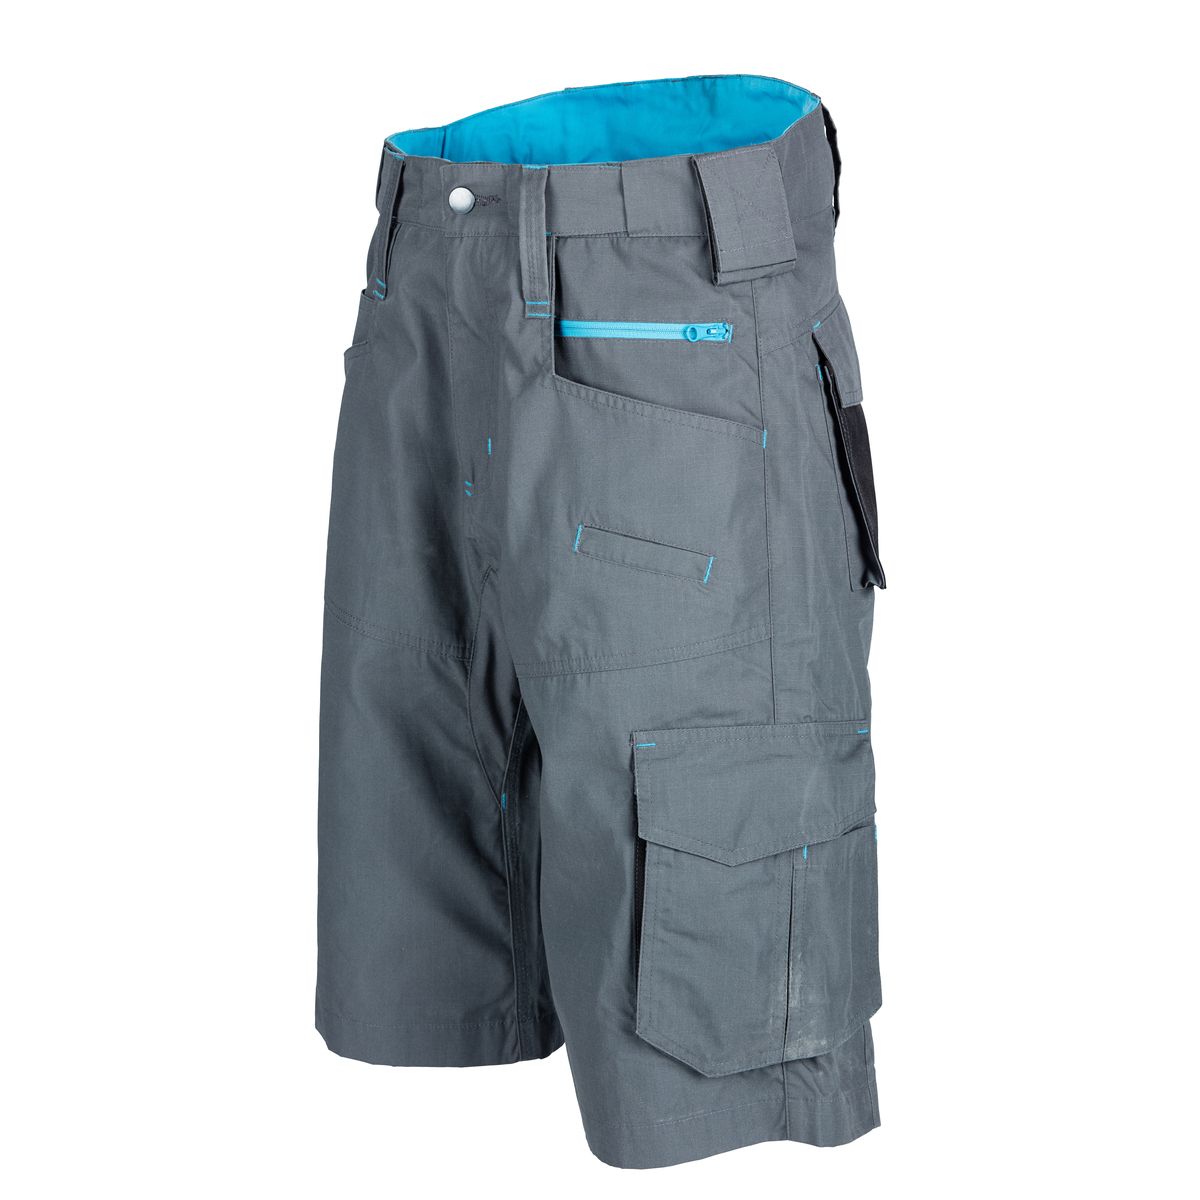 OX RIPSTOP SHORTS GRAPHITE 32″ 34″ 36″ 38″ – SJS Building Supplies in  Stoke-on-Trent, Staffordshire